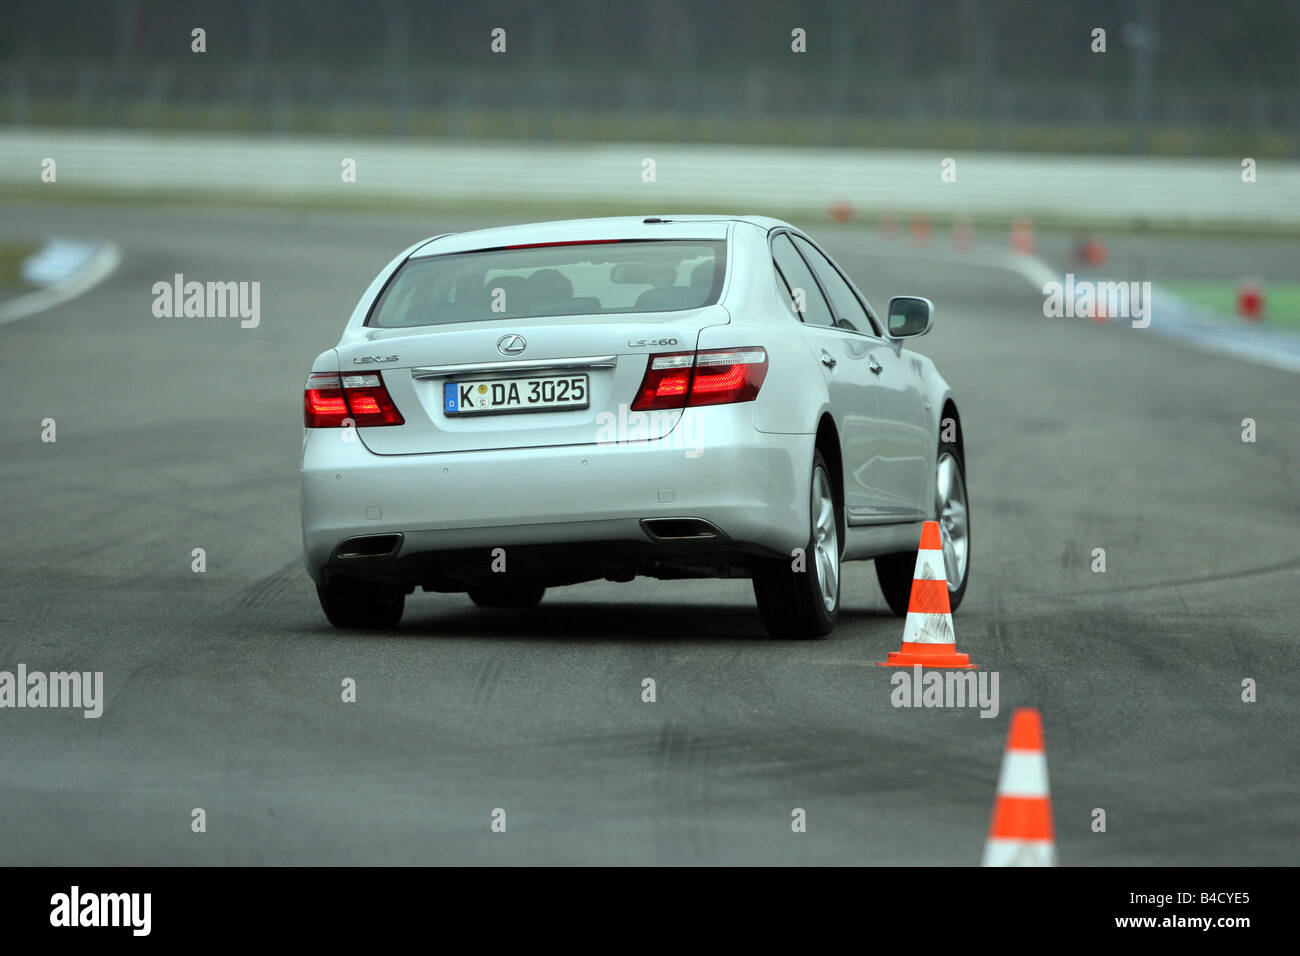 Lexus LS 460 Ambience Impression, model year 2007-, white, driving, diagonal from the back, rear view, Pilonen, test track Stock Photo